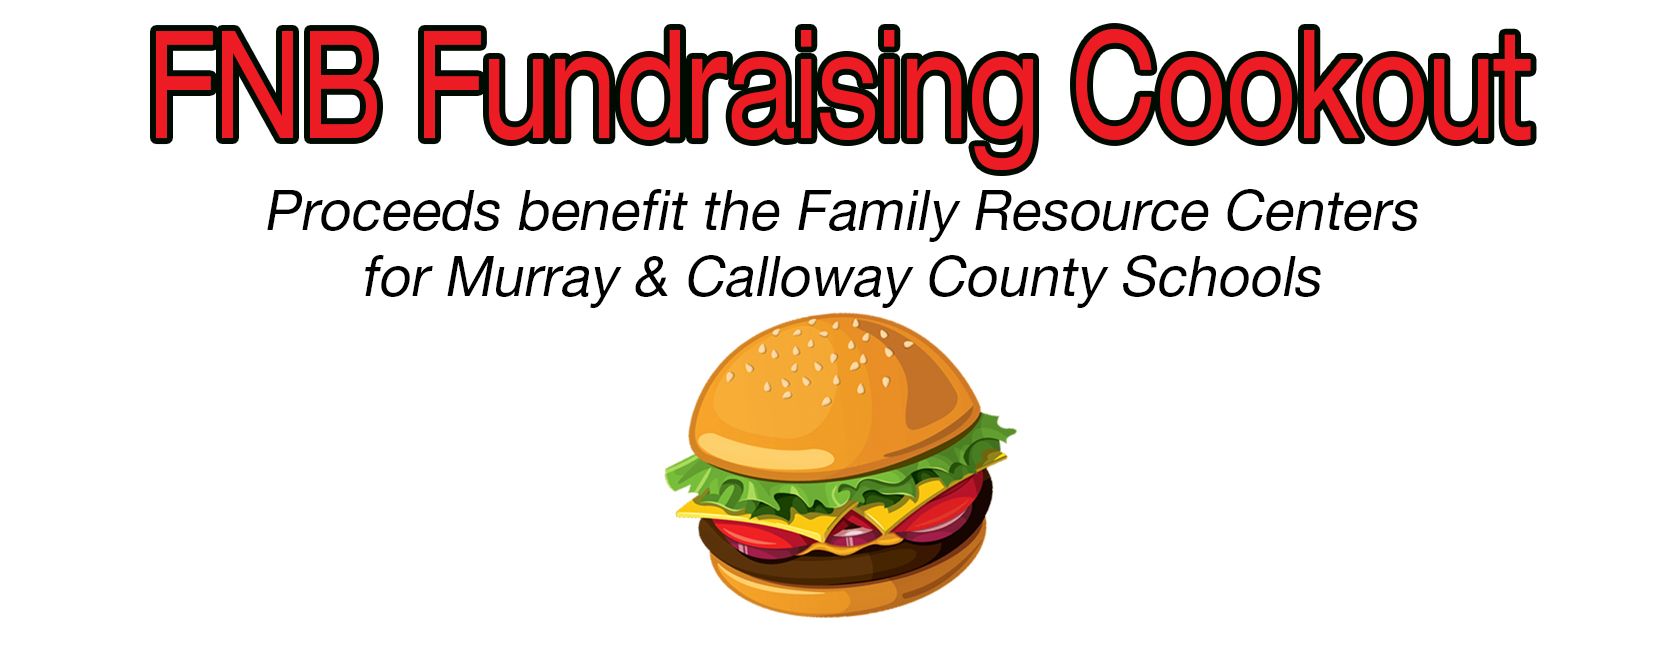 Fundraising Cookout